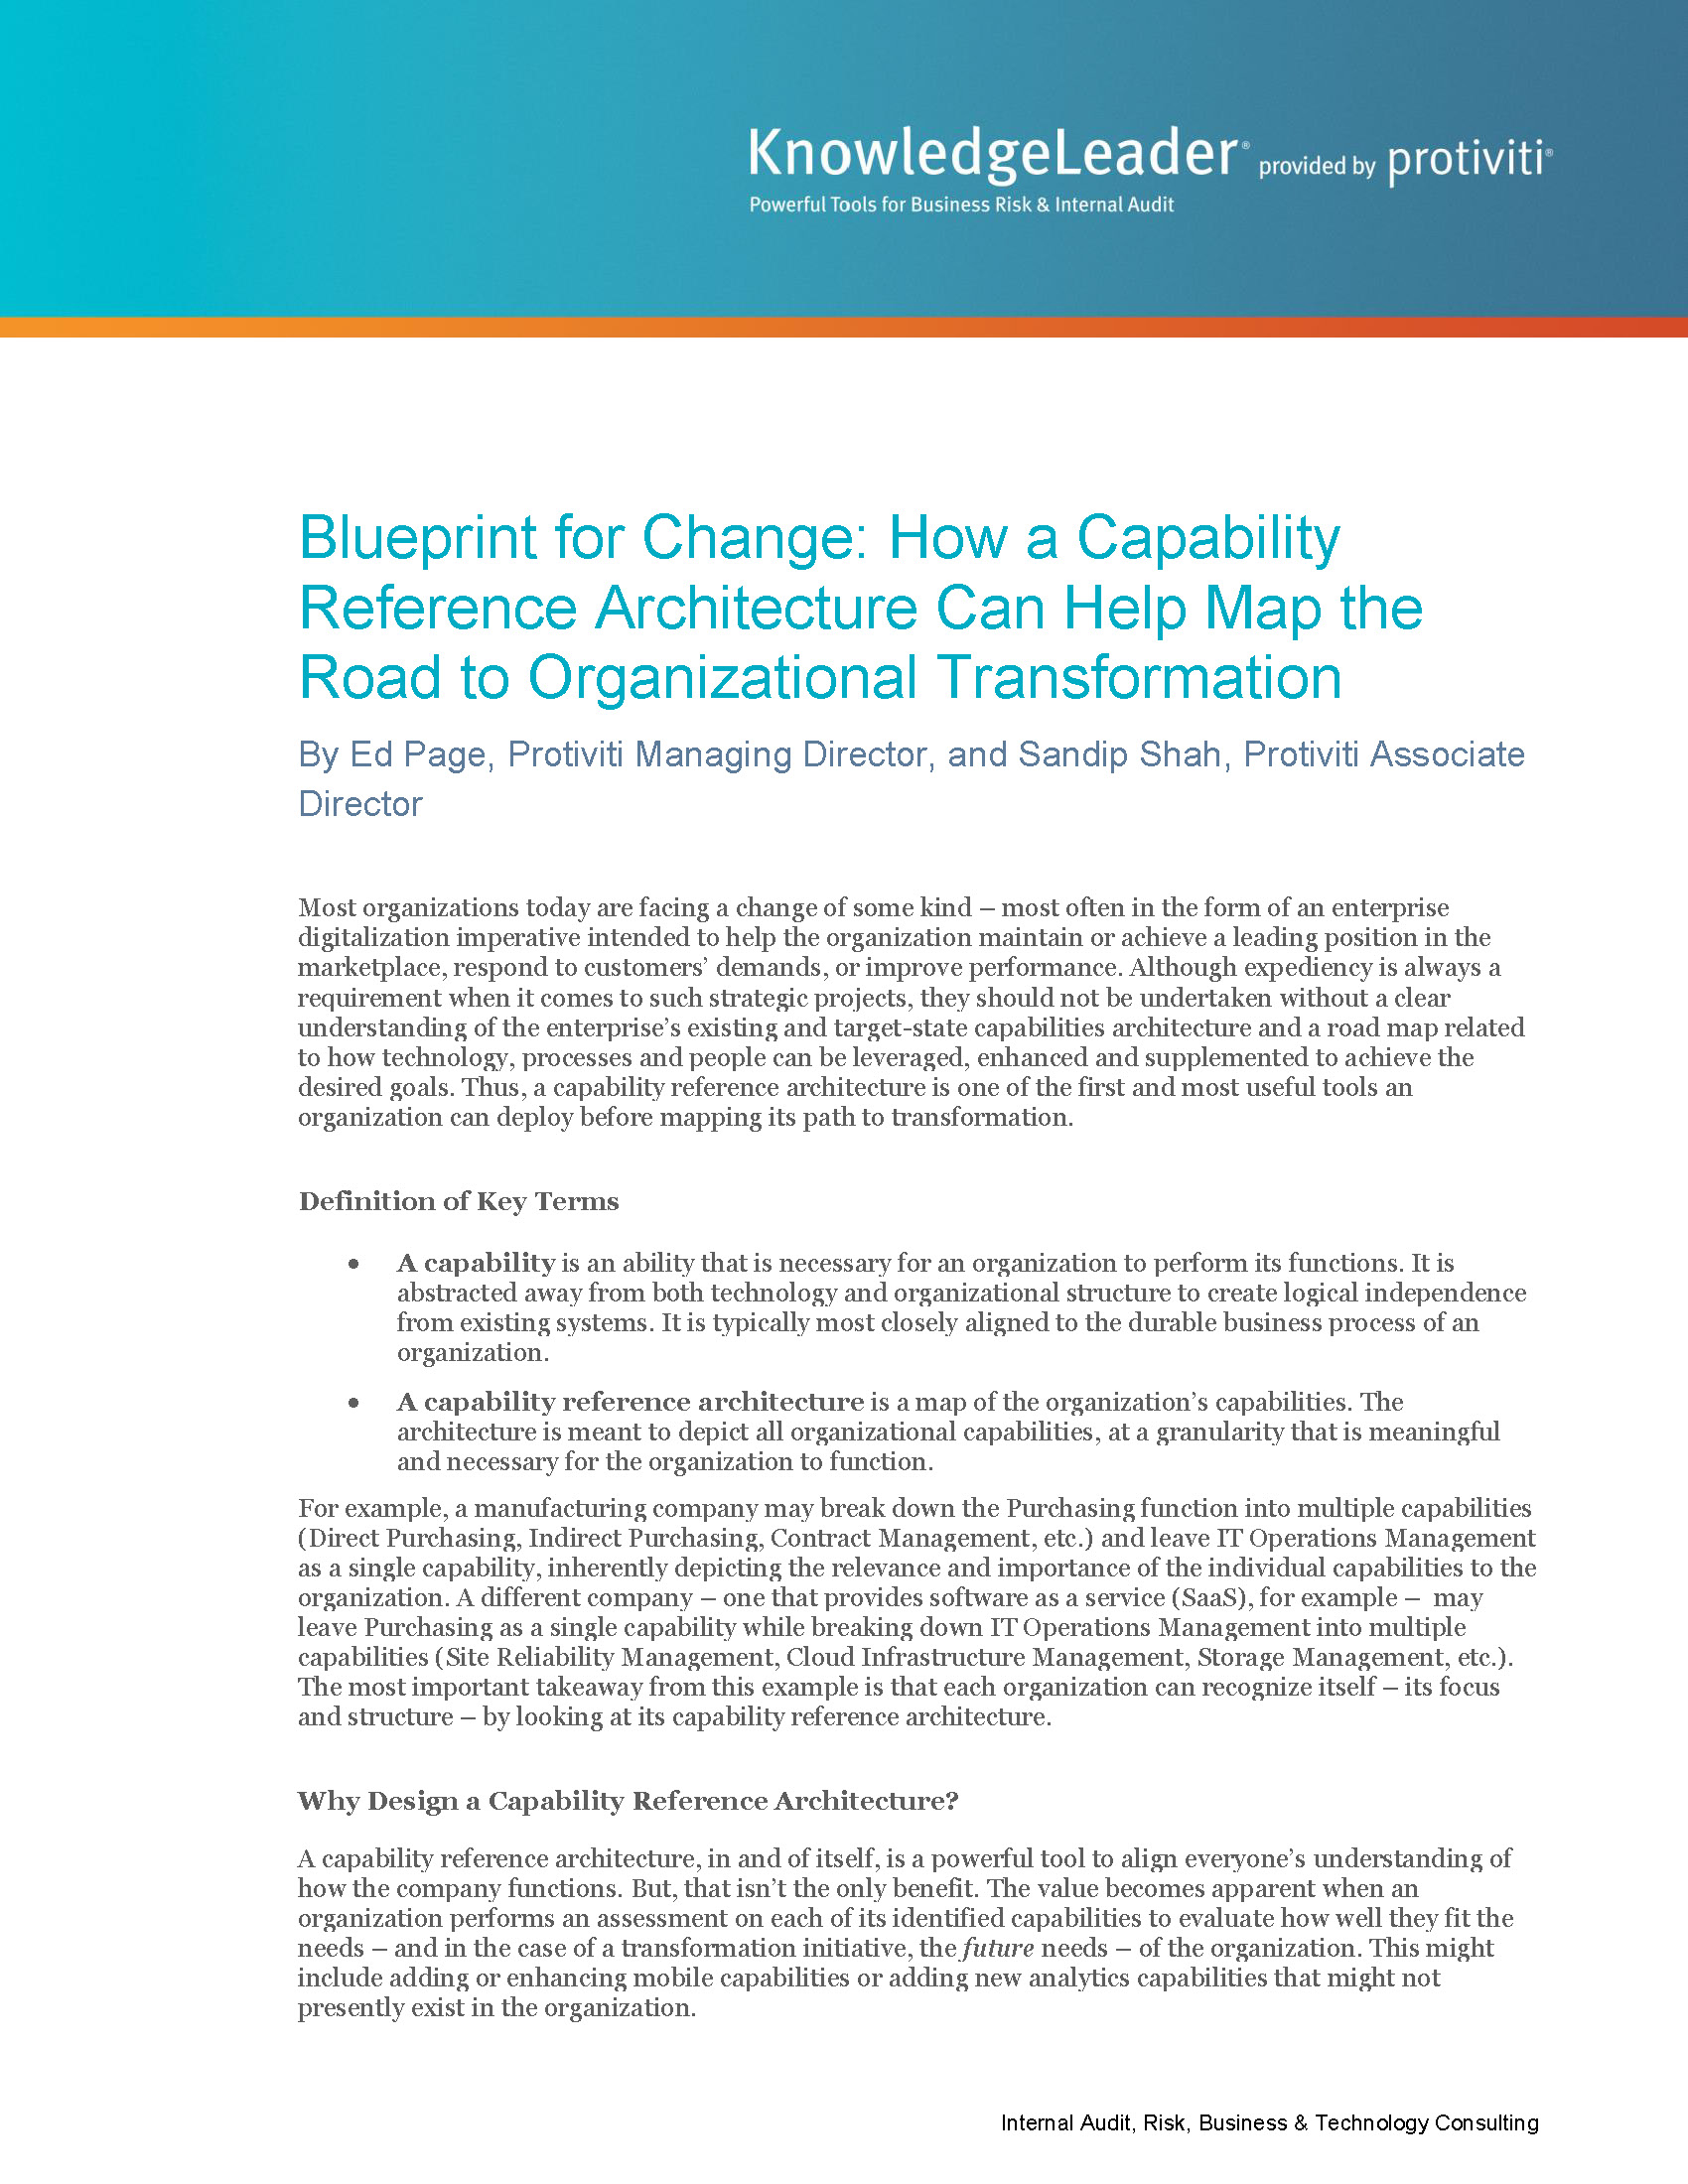 Screenshot of the first page of Blueprint for Change How a Capability Reference Architecture Can Help Map the Road to Organizational Transformation